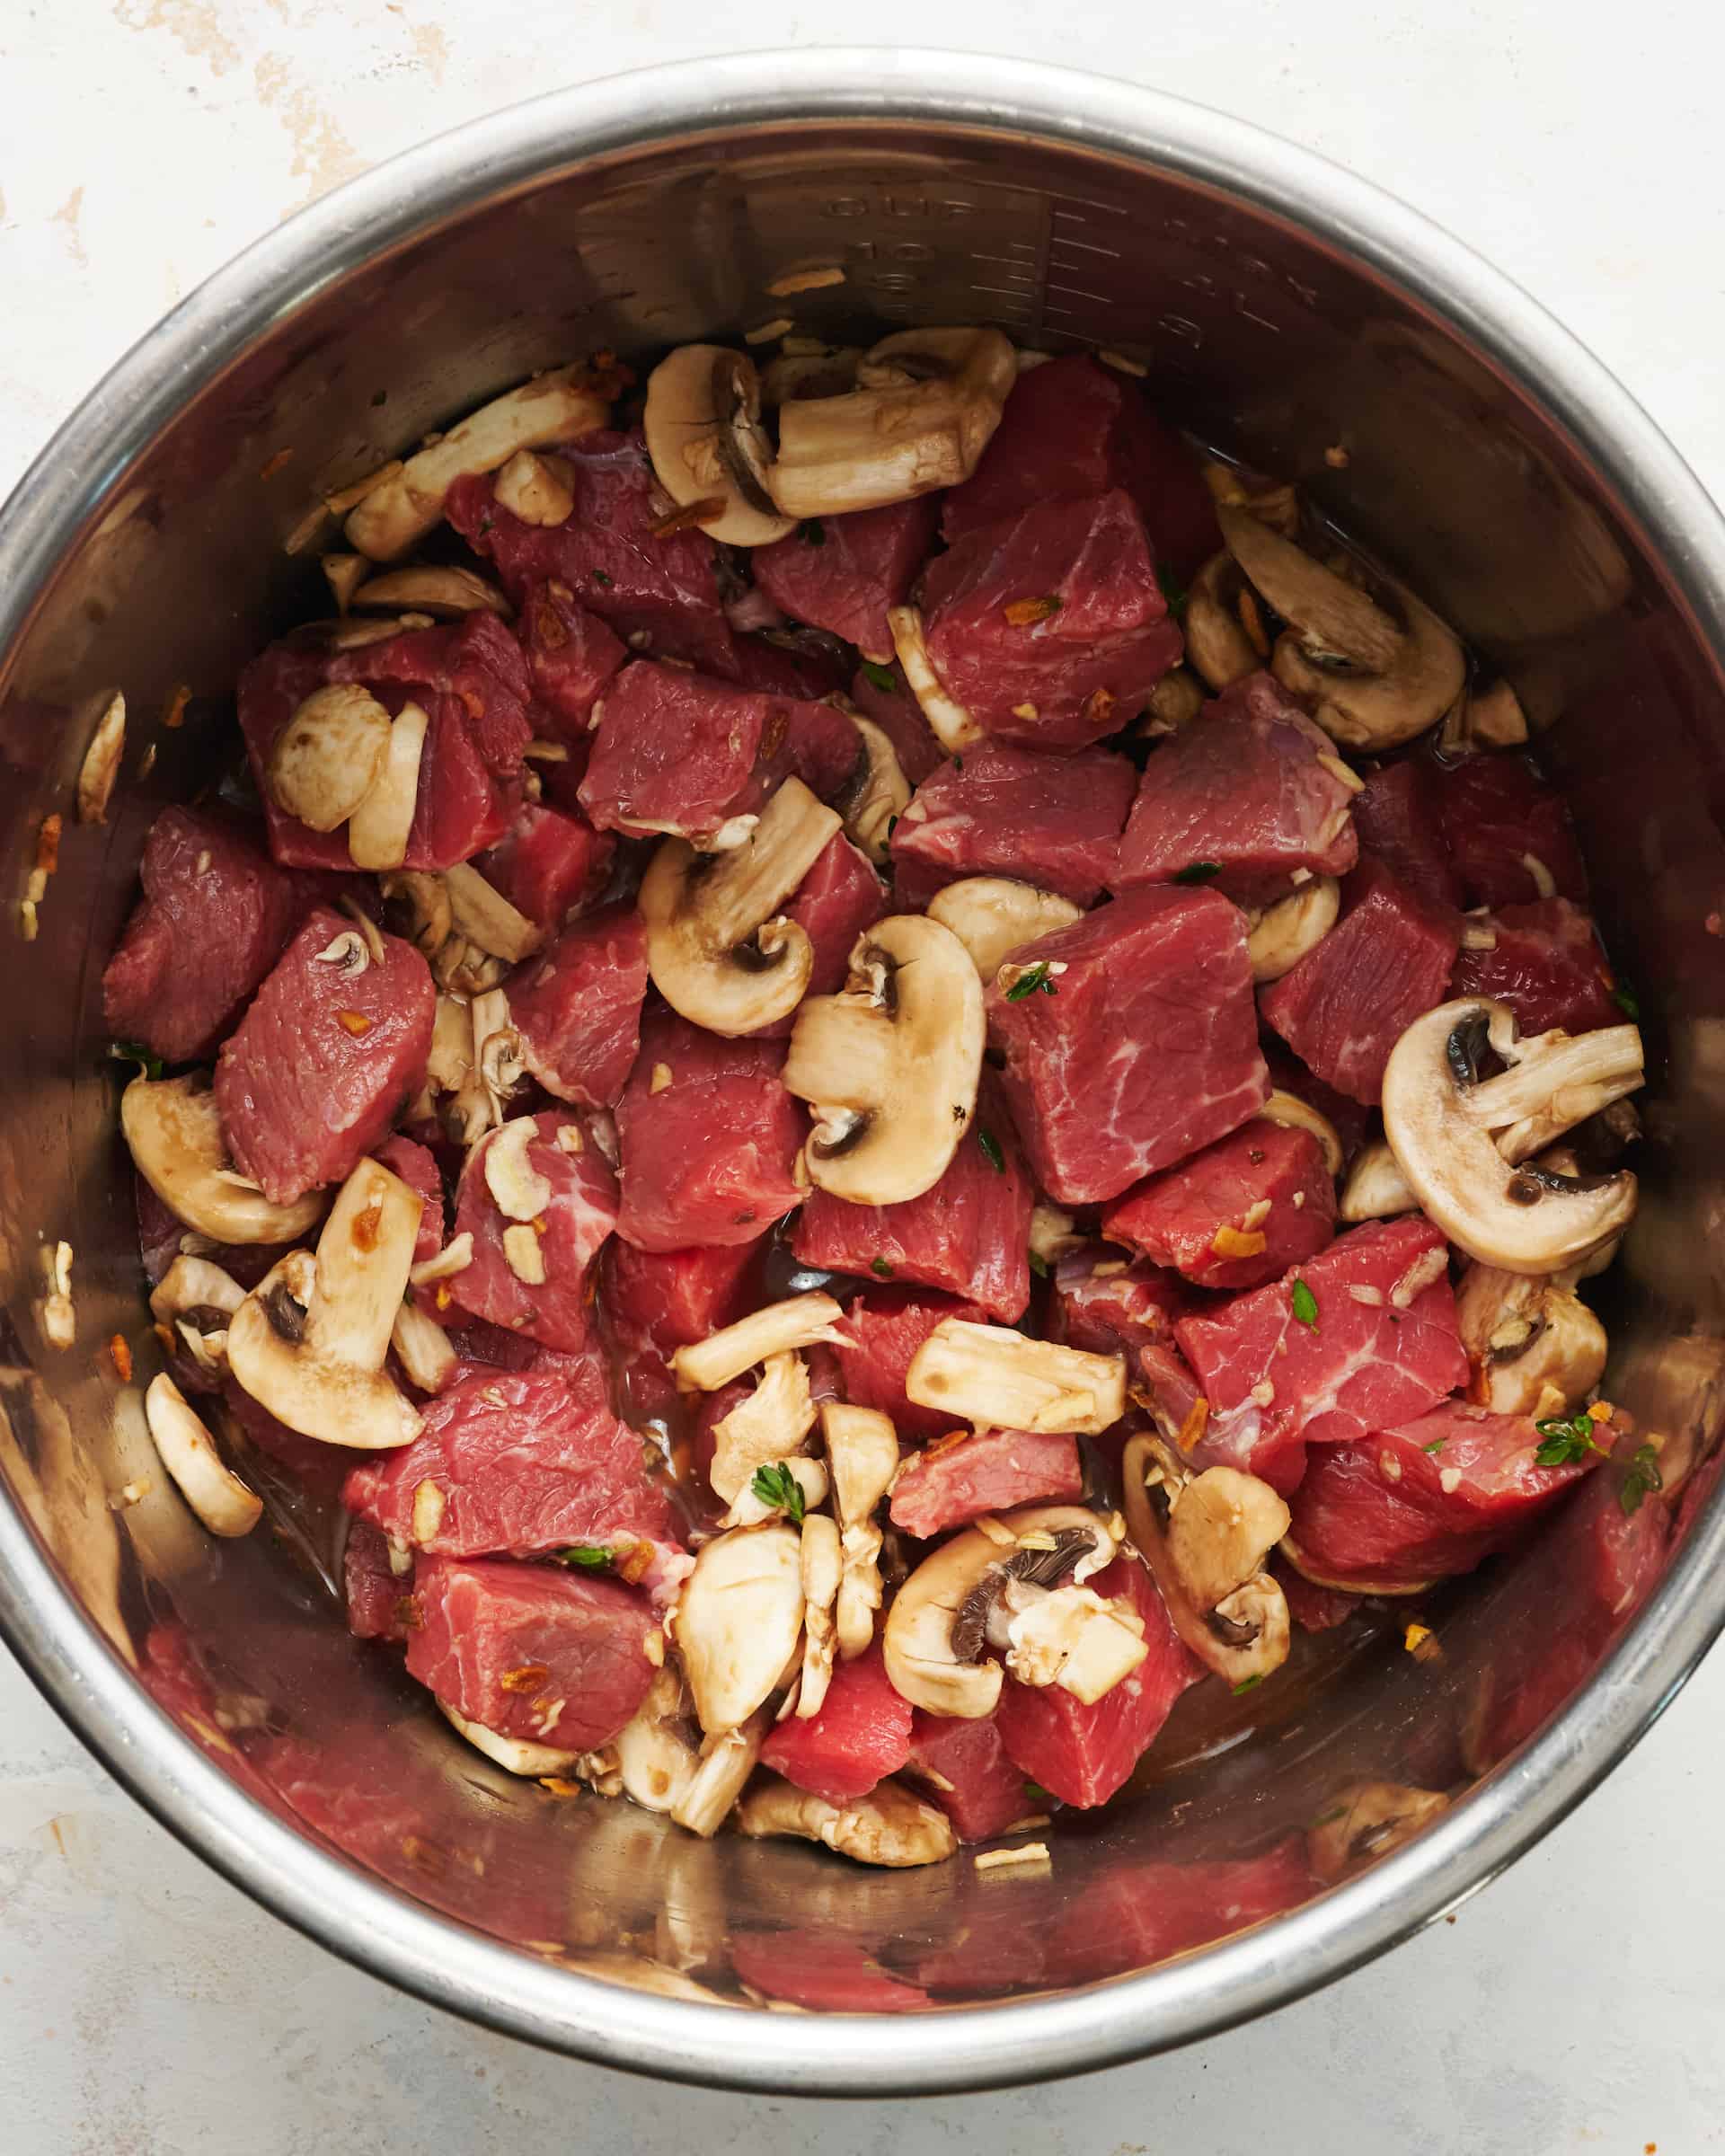 Ingredients for beef tips in the pot before being cooked